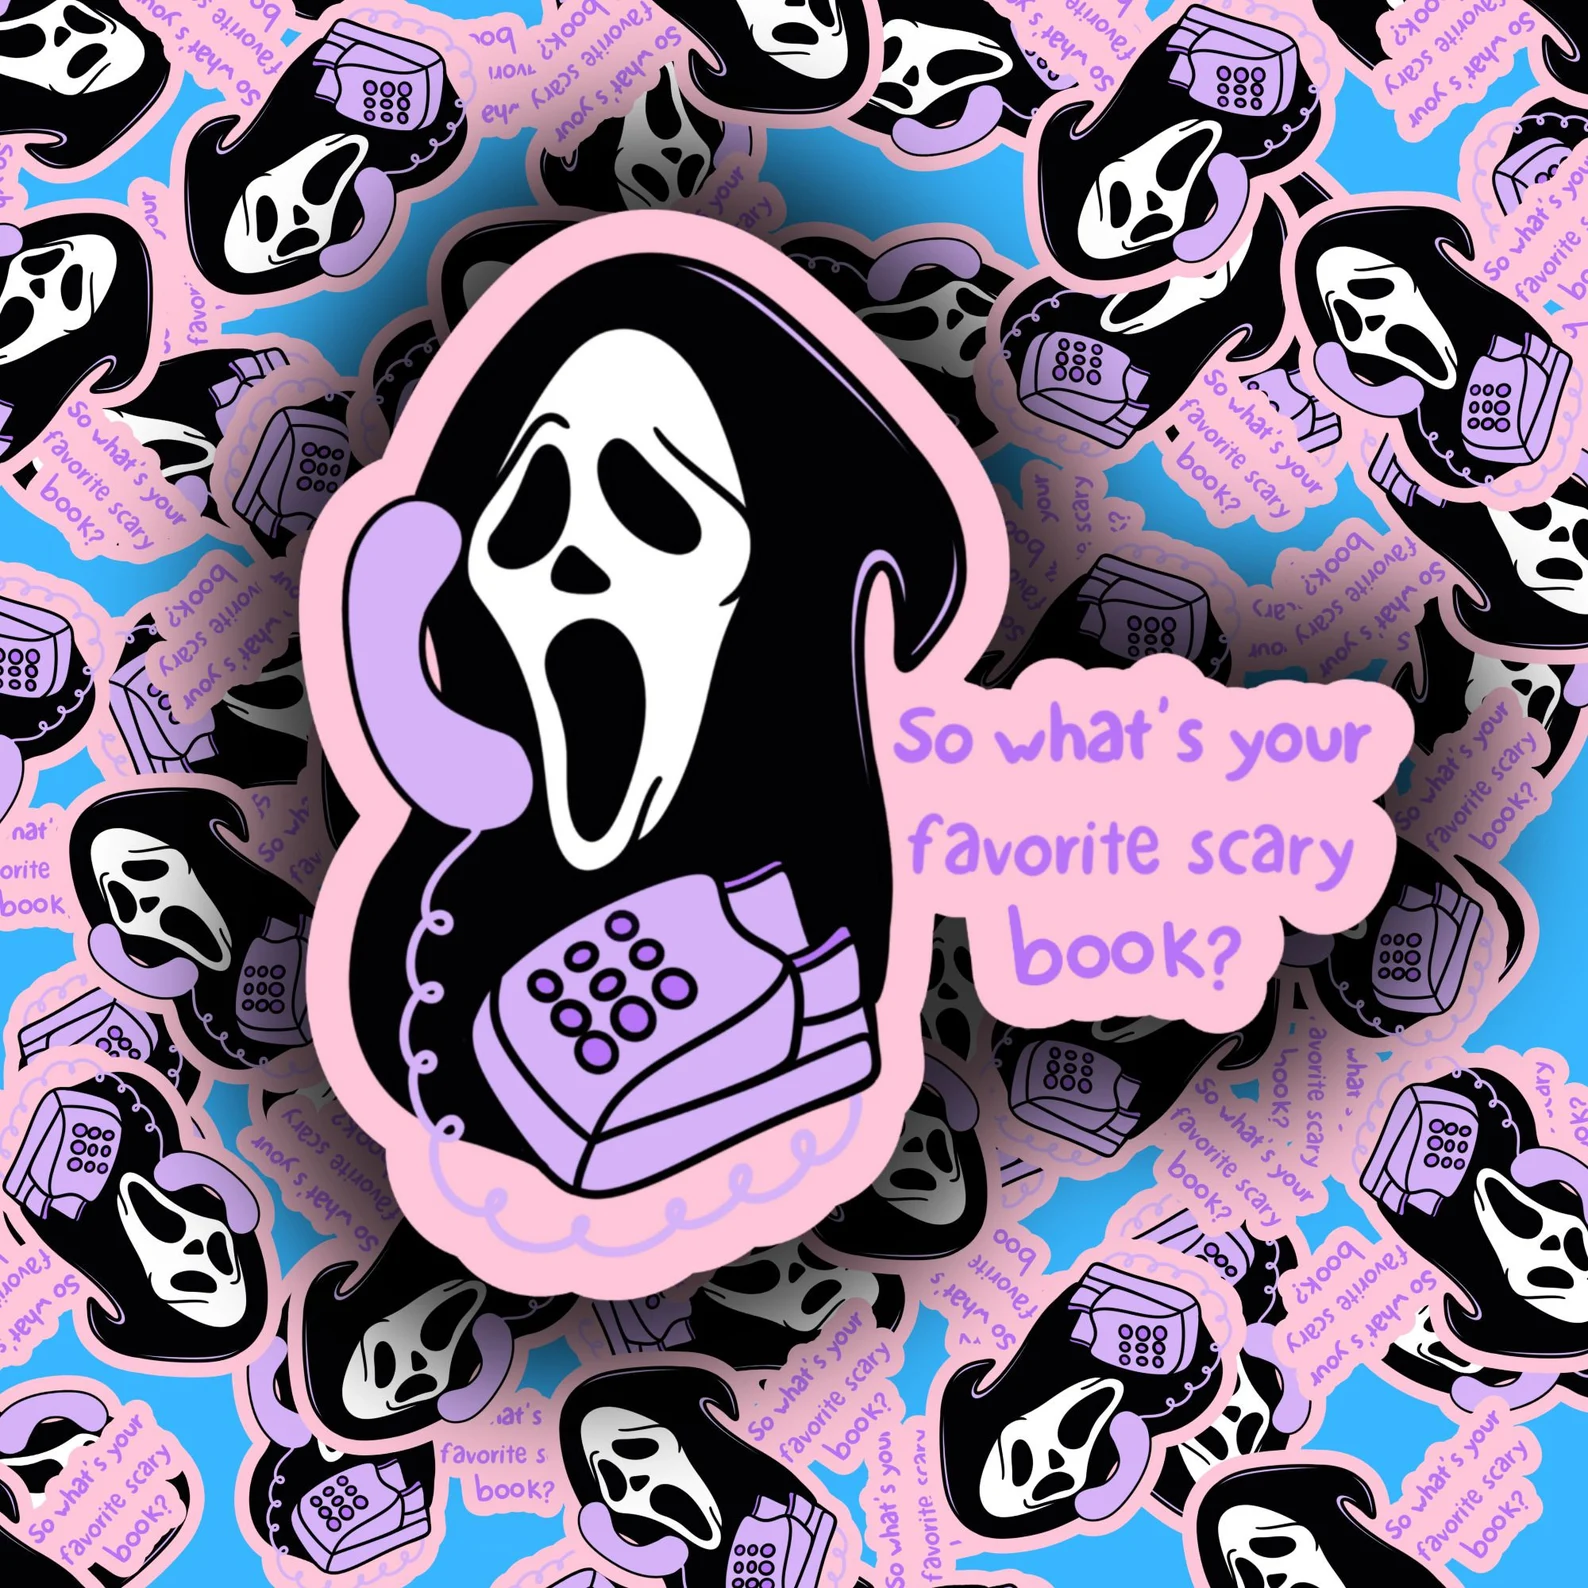 Scream-inspired sticker which says "what's your favorite scary book?"